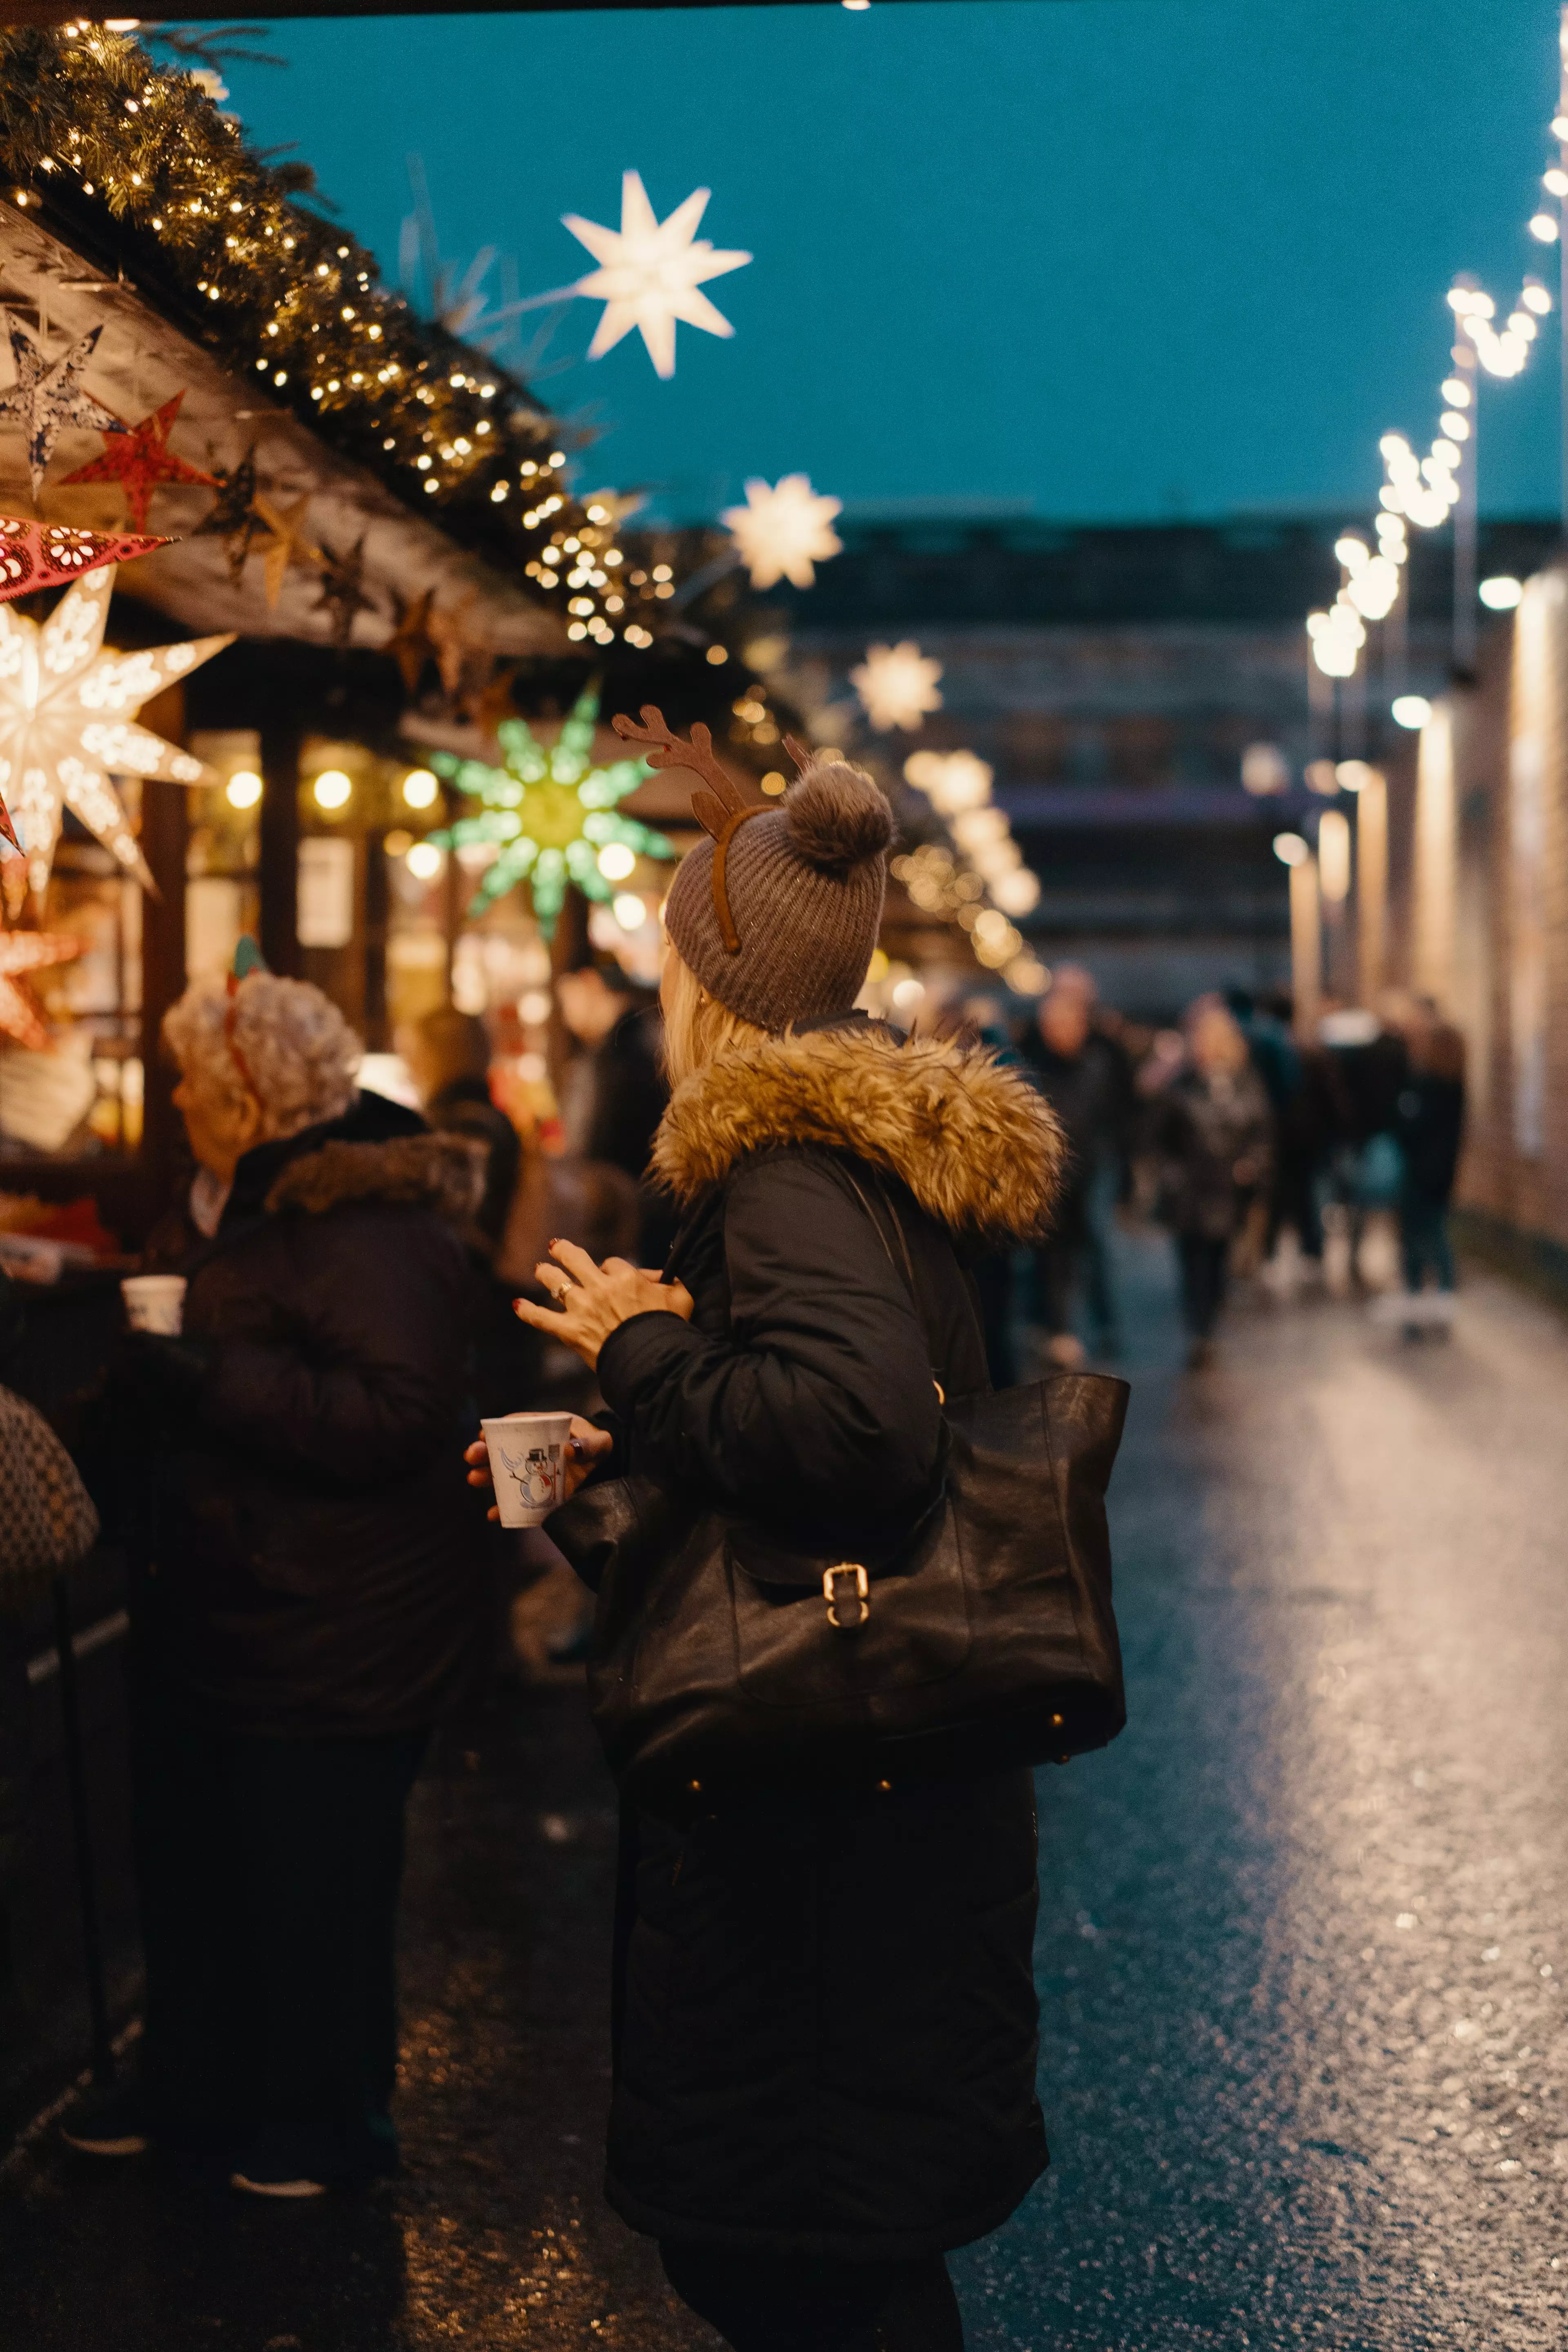 You could choose to take flight in December where you could choose a festive city filled with Christmas markets to explore. (